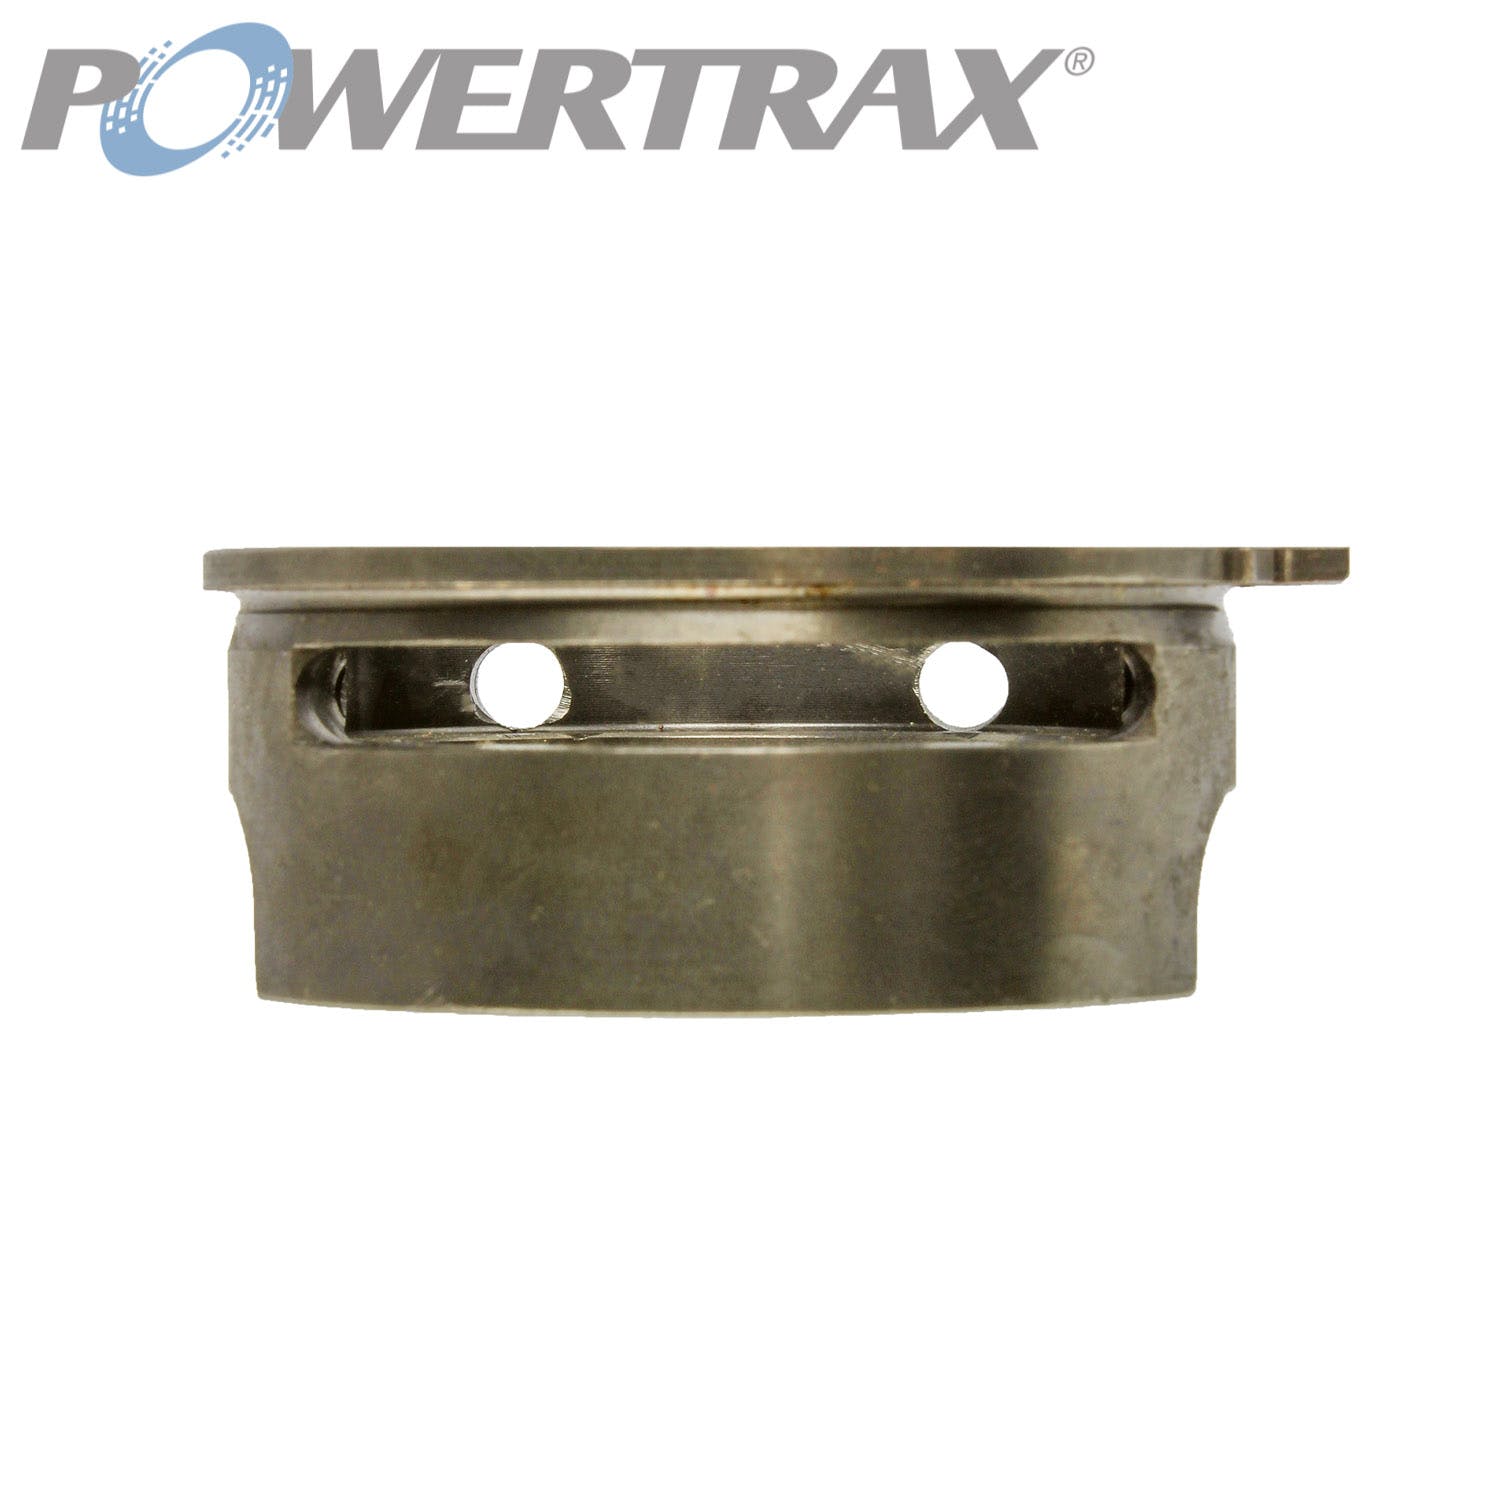 PowerTrax 624005SDE2 Flanged Spacer, SDE, 6241005-2